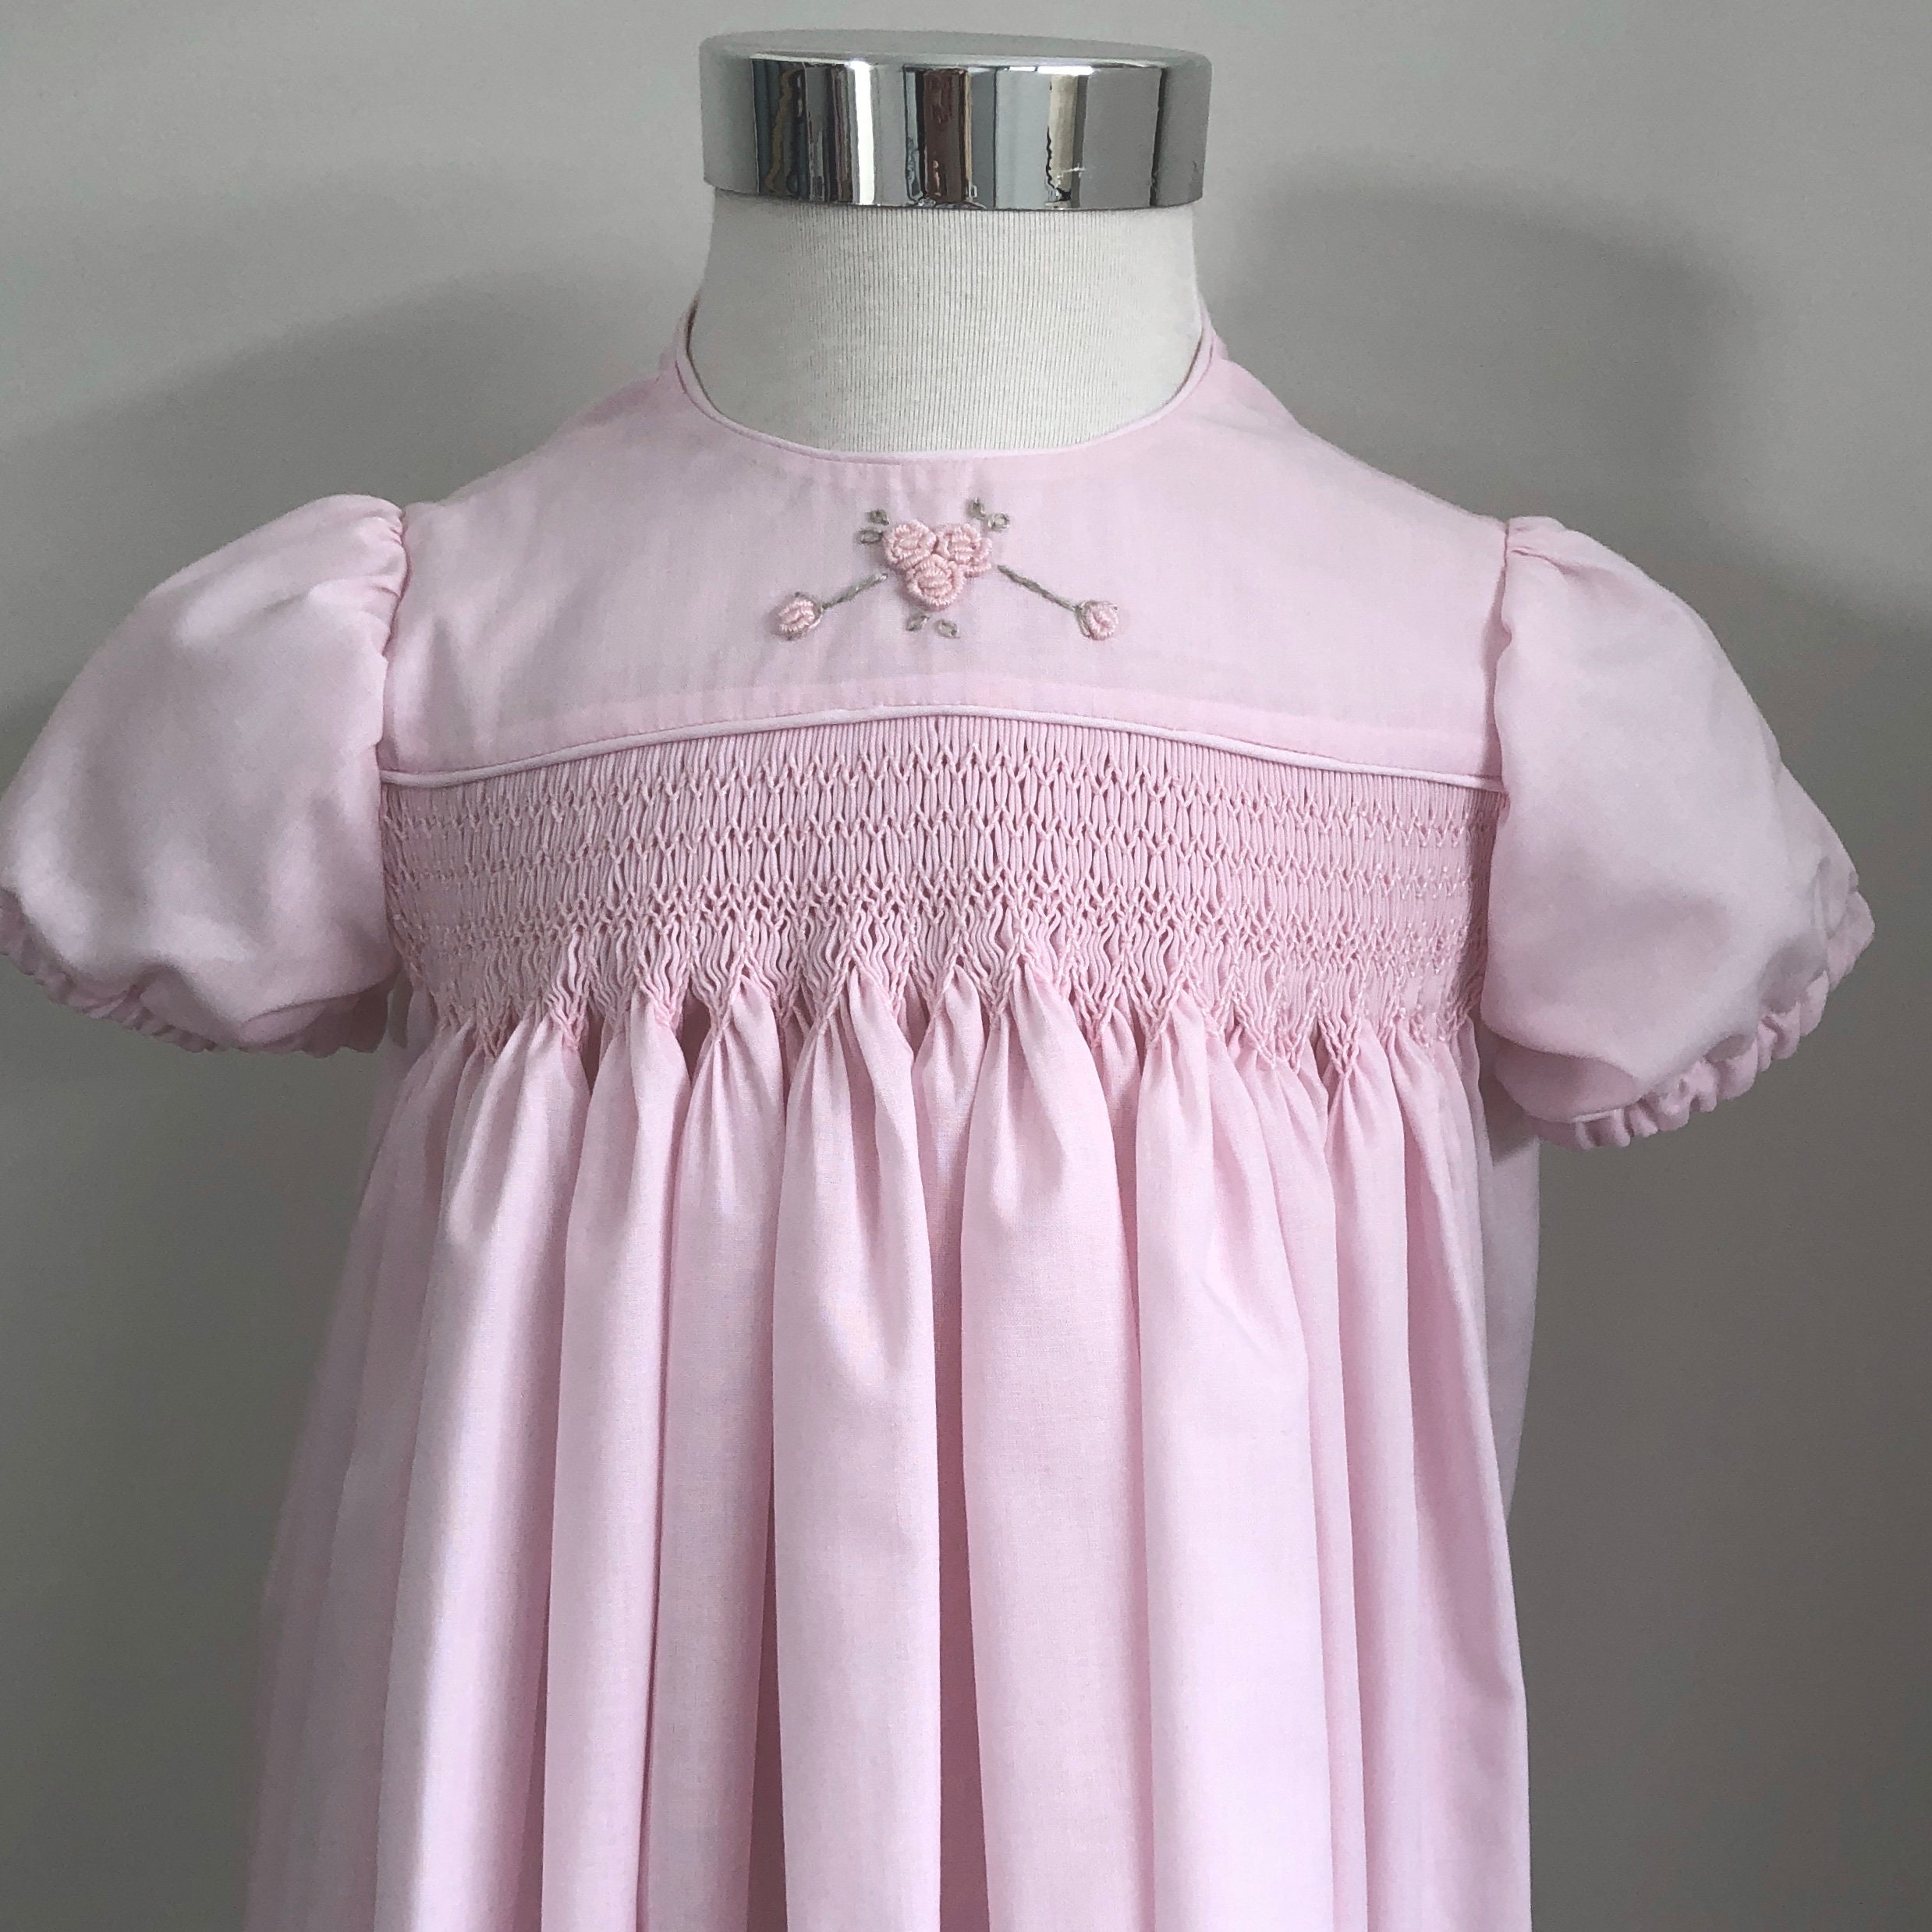 Baby Dress 6 Months, Hand Smocked Pink Imperial Batiste Fabric With Pink  Rosebud Embroidery, Special Occasion Dress, Baptism or Wedding 